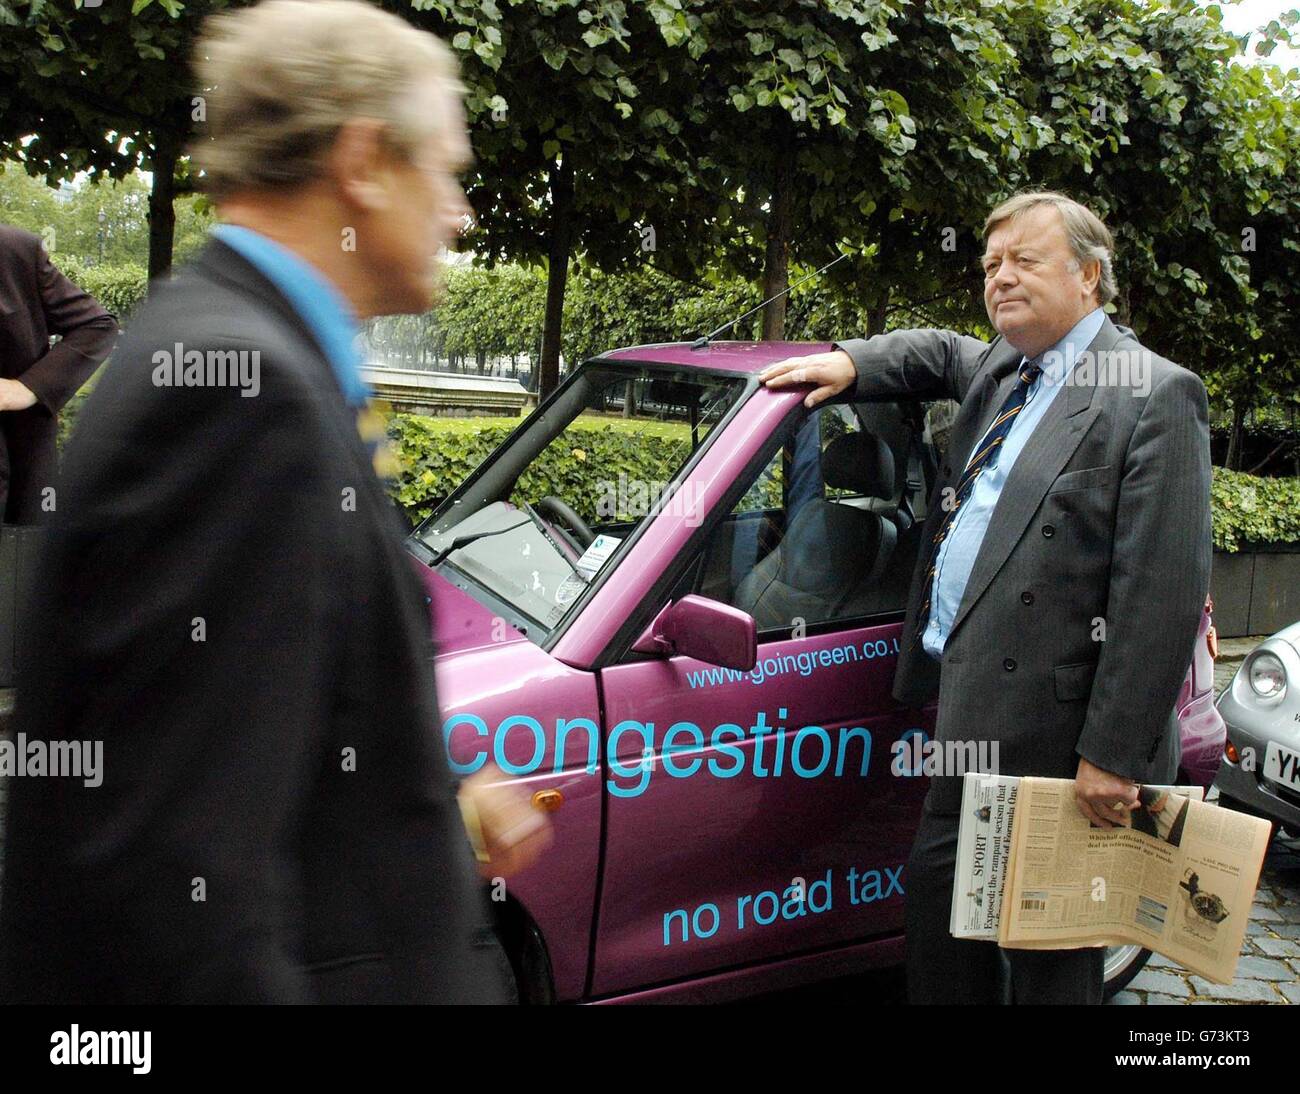 Conservative MP Kenneth Clark takes a look at the G-Wiz electric car being demonstrated outside the House of Commons in London. The makers of the G-Wiz, which costs 7599, claim it is 100% emission free, consumes just one quarter the energy of the average petrol car and is the most energy efficient car on the road according to the Energy Saving Trust. Drivers of the G-Wiz will also be exempt from the congestion charge in central London. Stock Photo